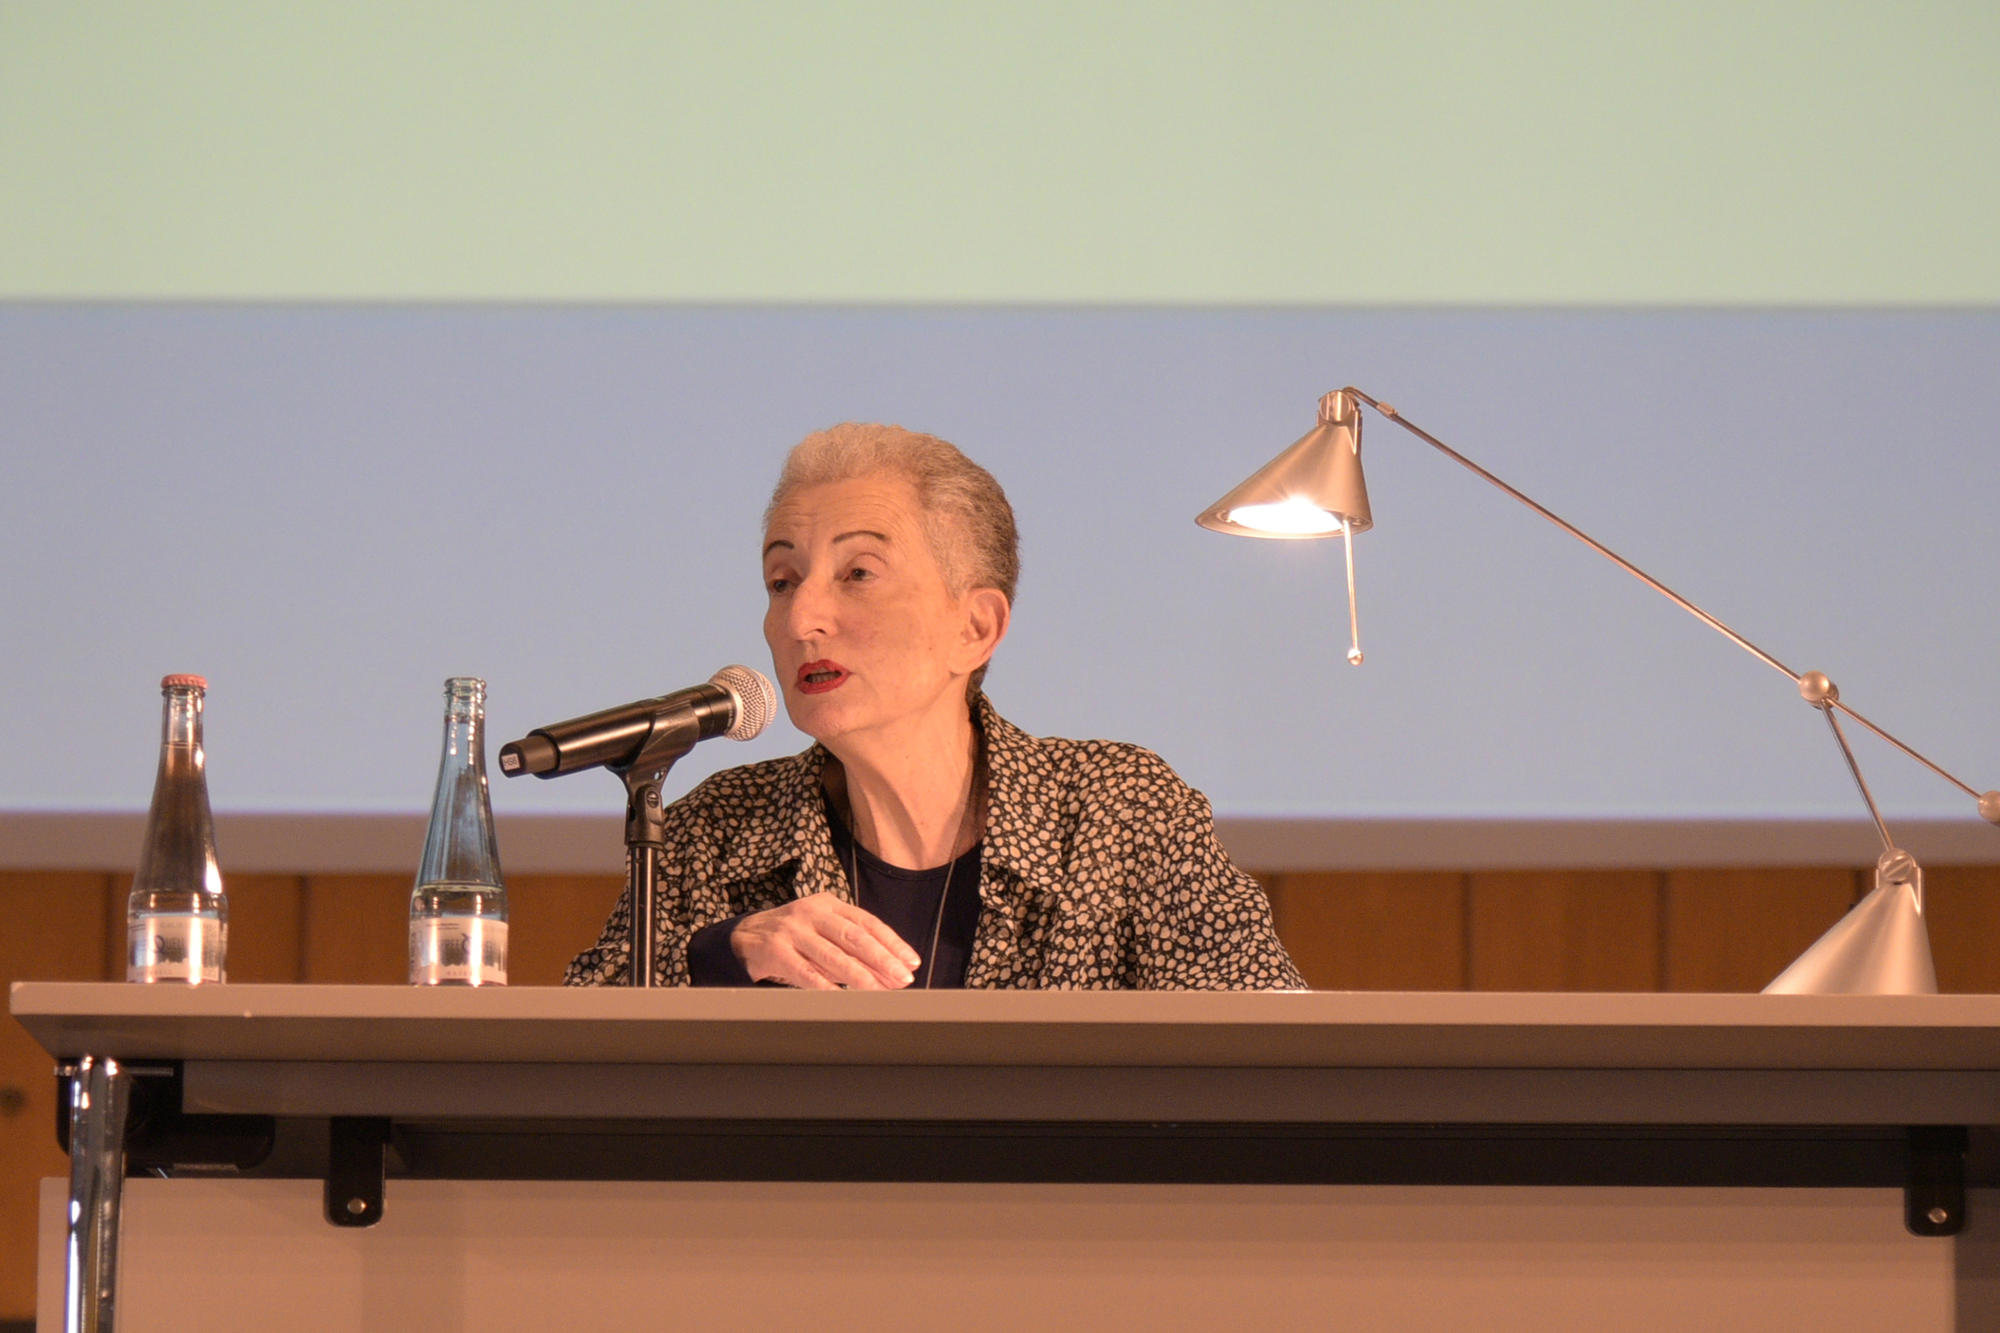 Hélène Cixous delivered the Hegel Lecture at Freie Universität Berlin on May 11, 2016.